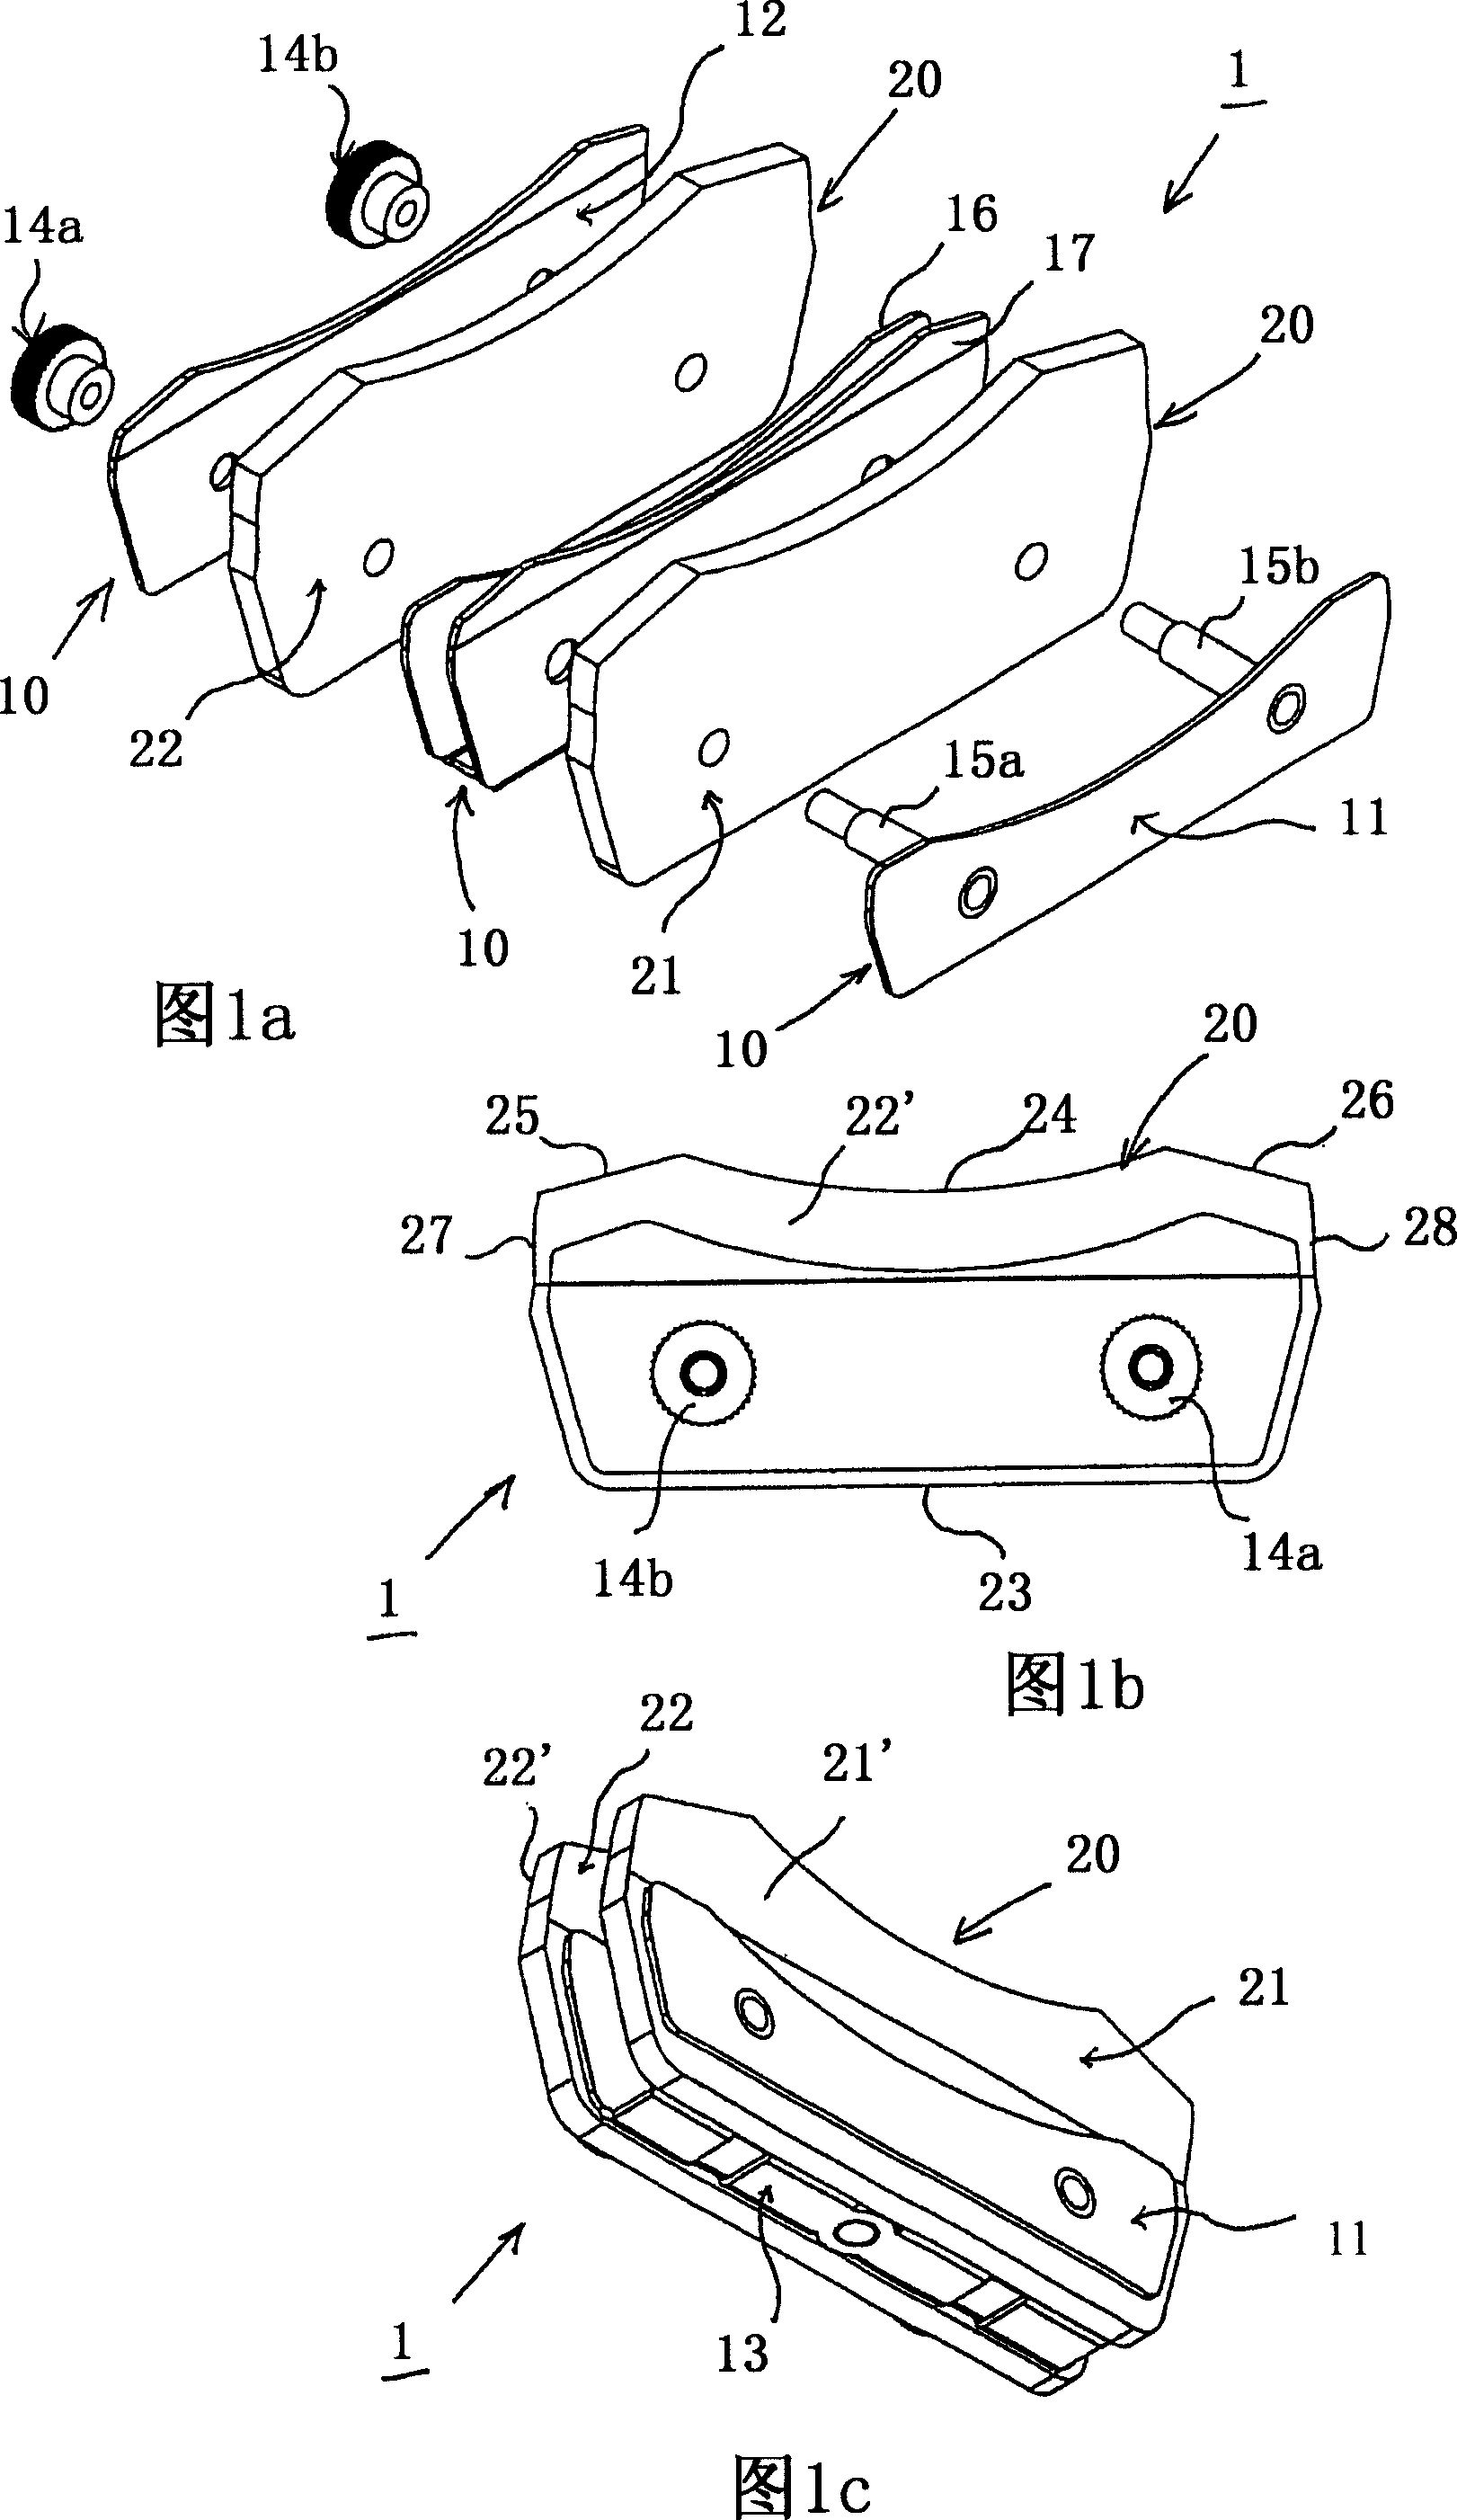 Device and method for chambered doctor blade